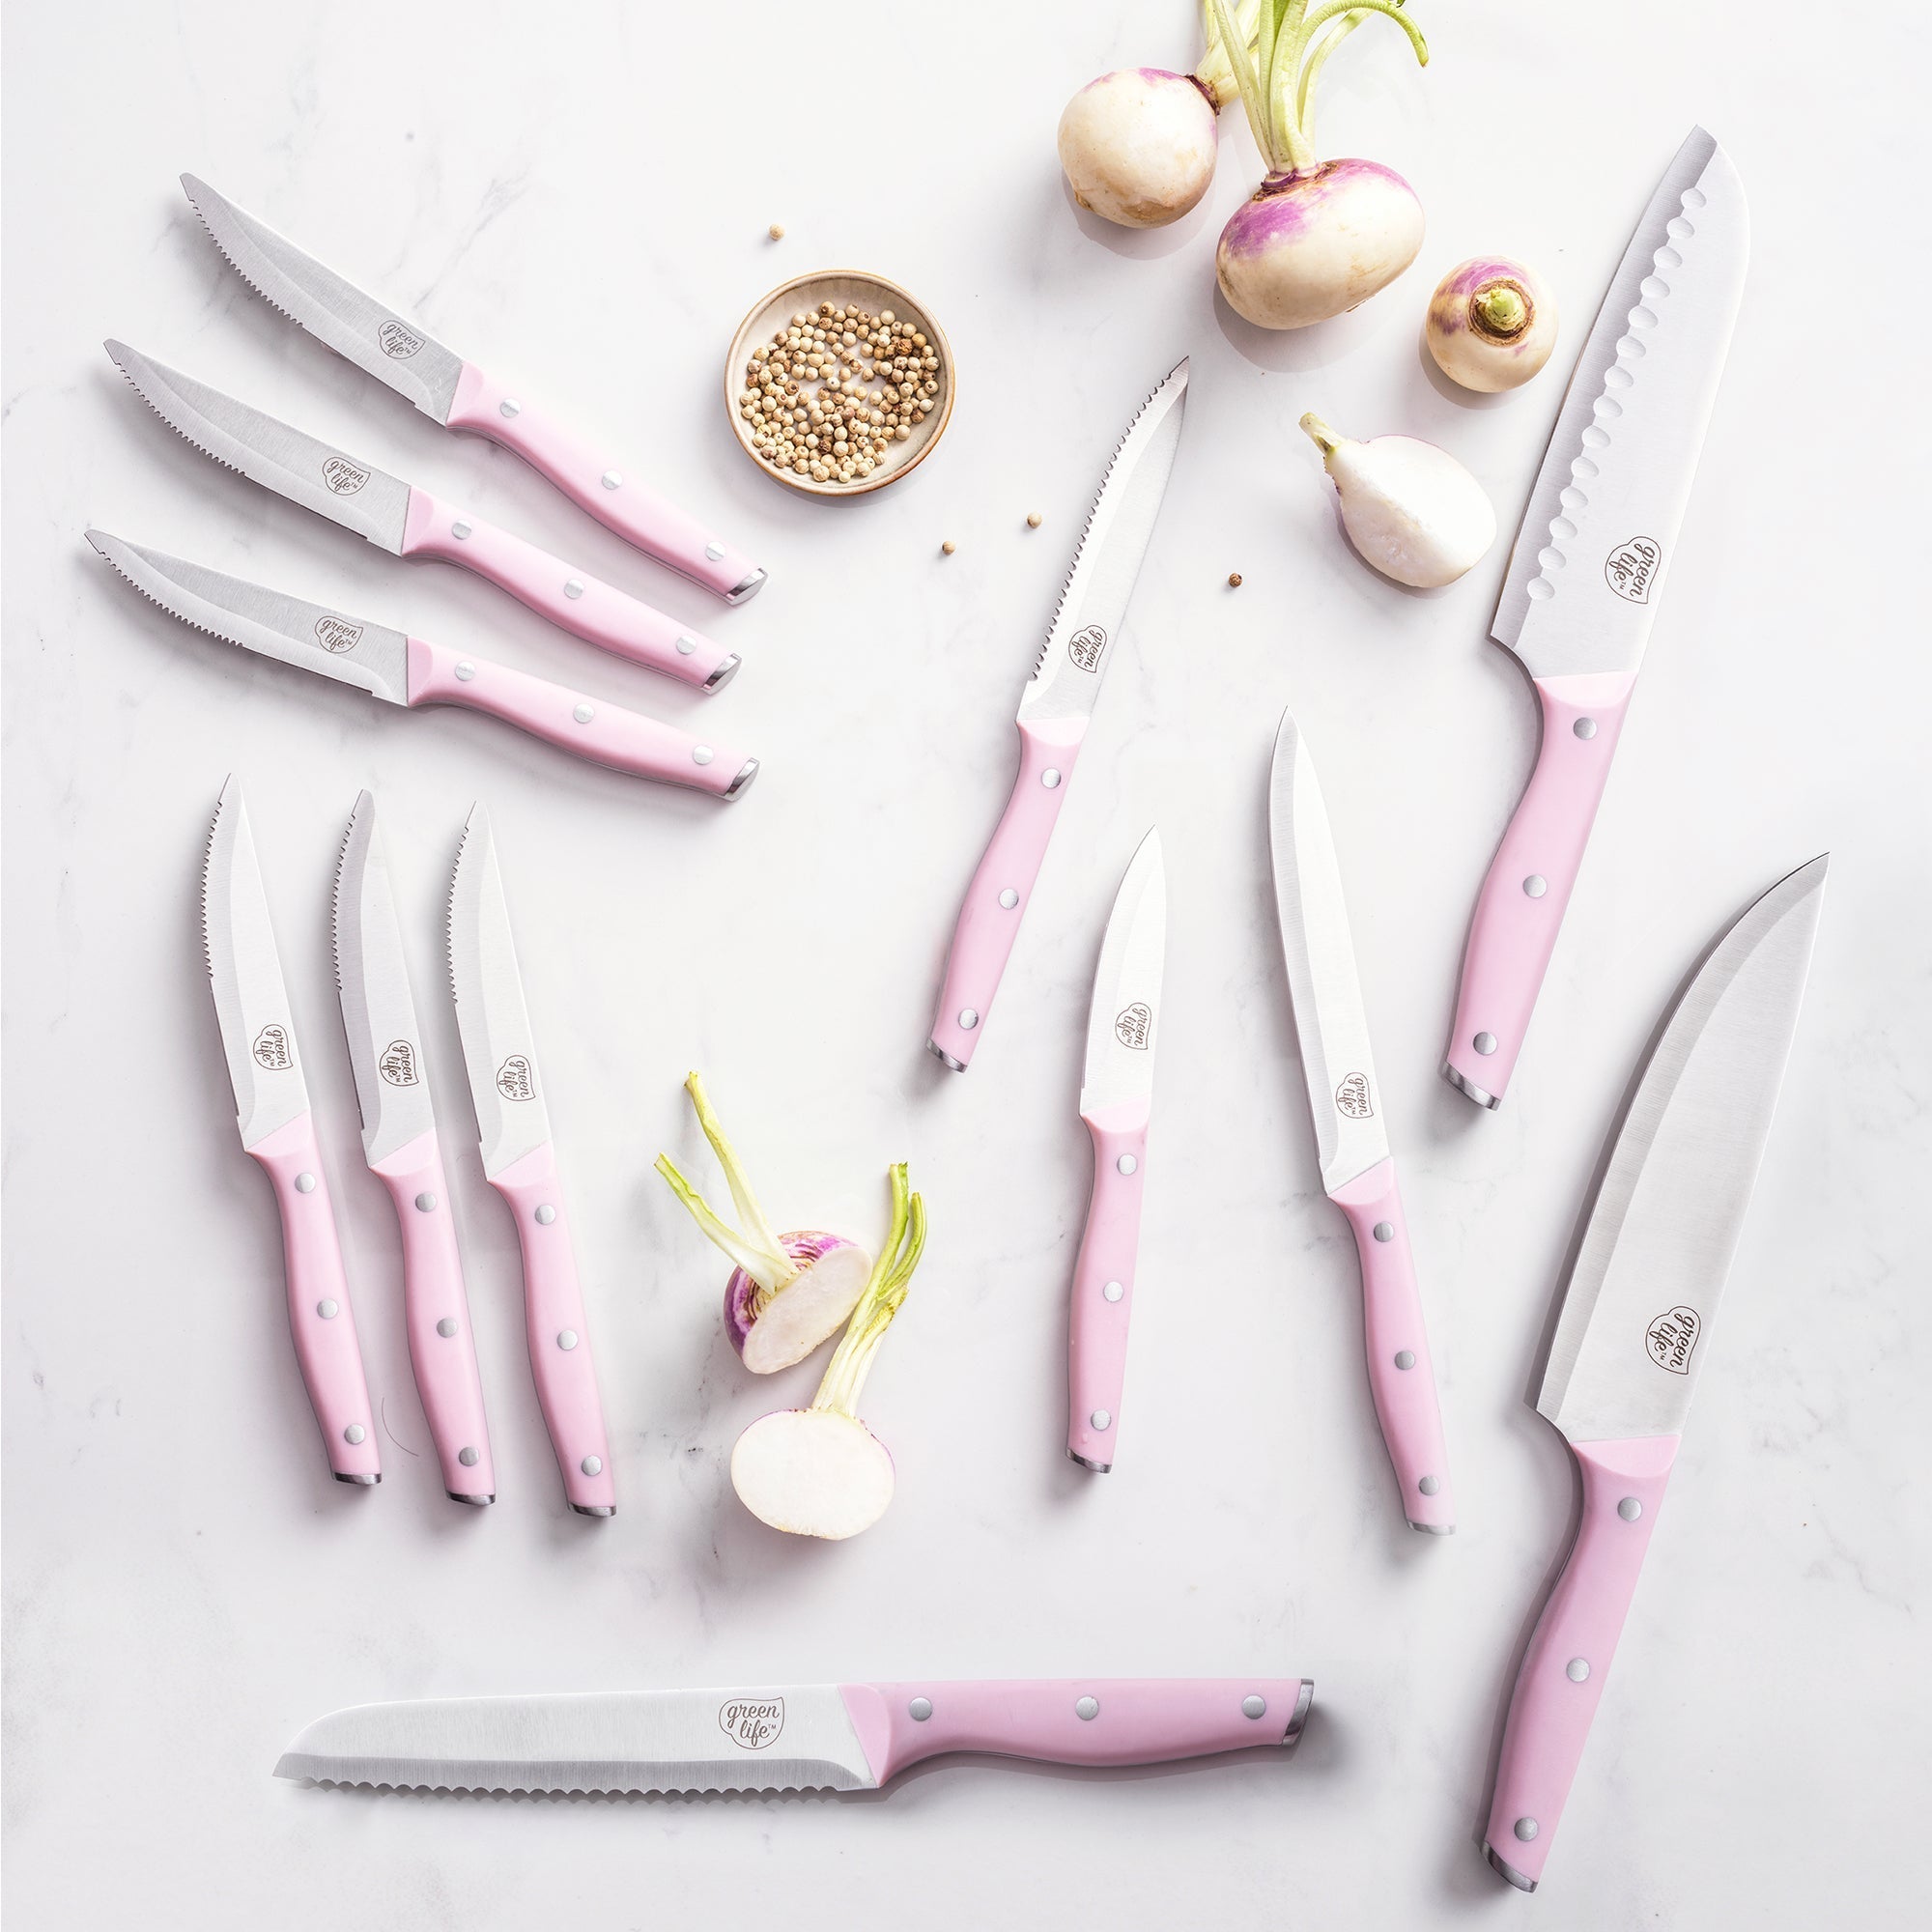 5-Piece Pink Green Life High Carbon Stainless Steel Knife Set with Covers